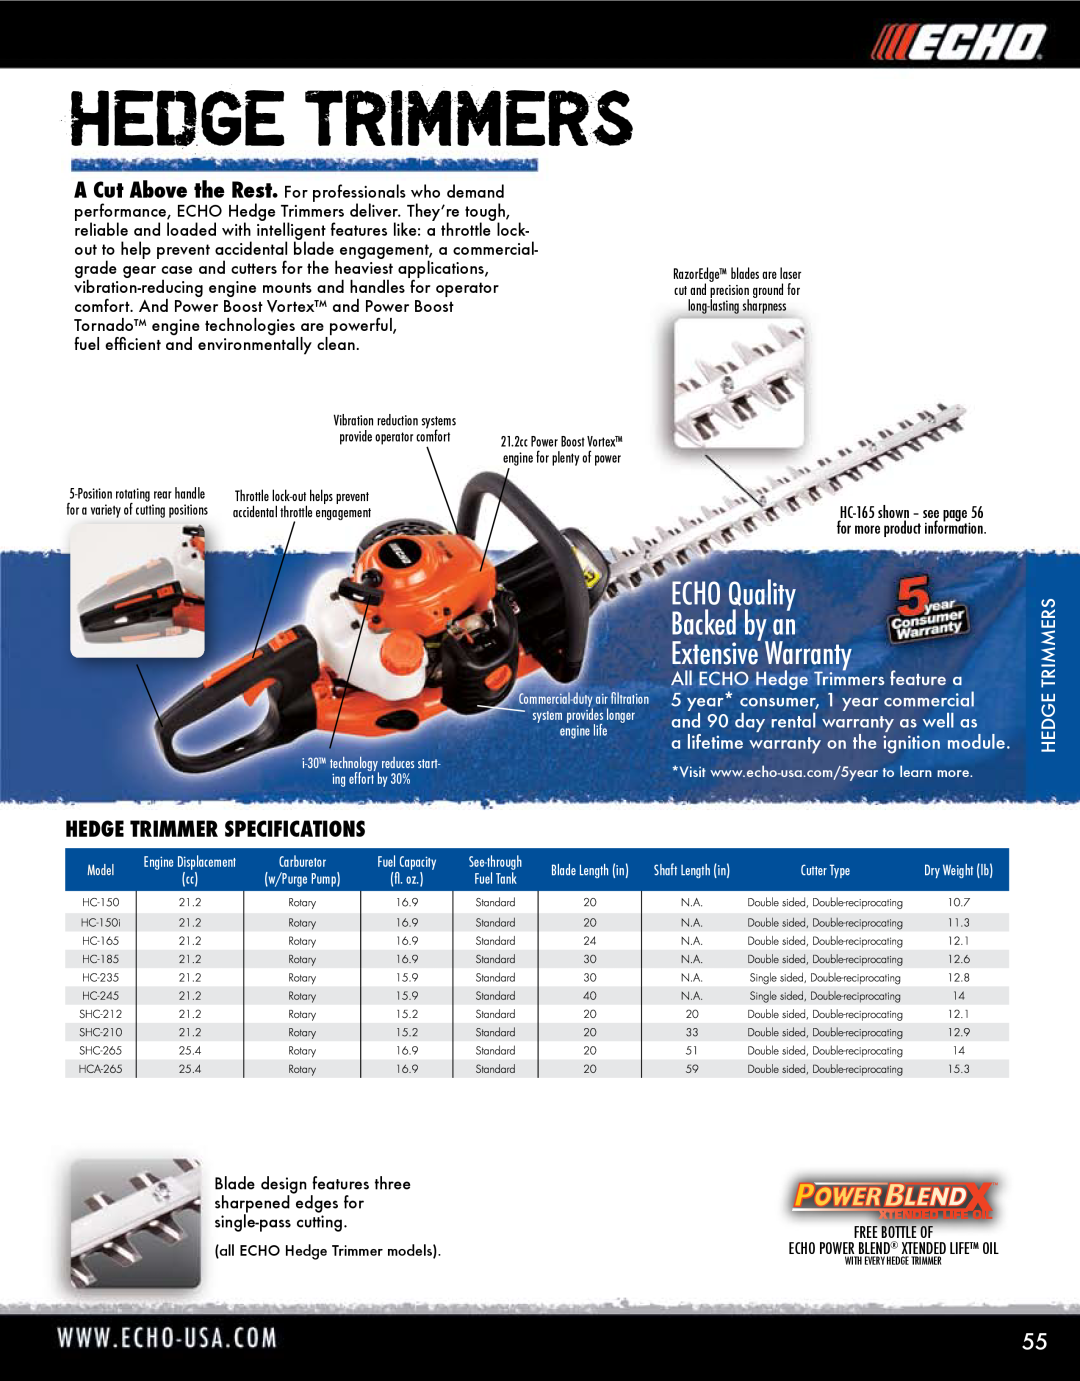 Echo HV-110XG manual Hedge Trimmer Specifications, Hedge Trimmers, ECHO Quality Backed by an Extensive Warranty, Model 